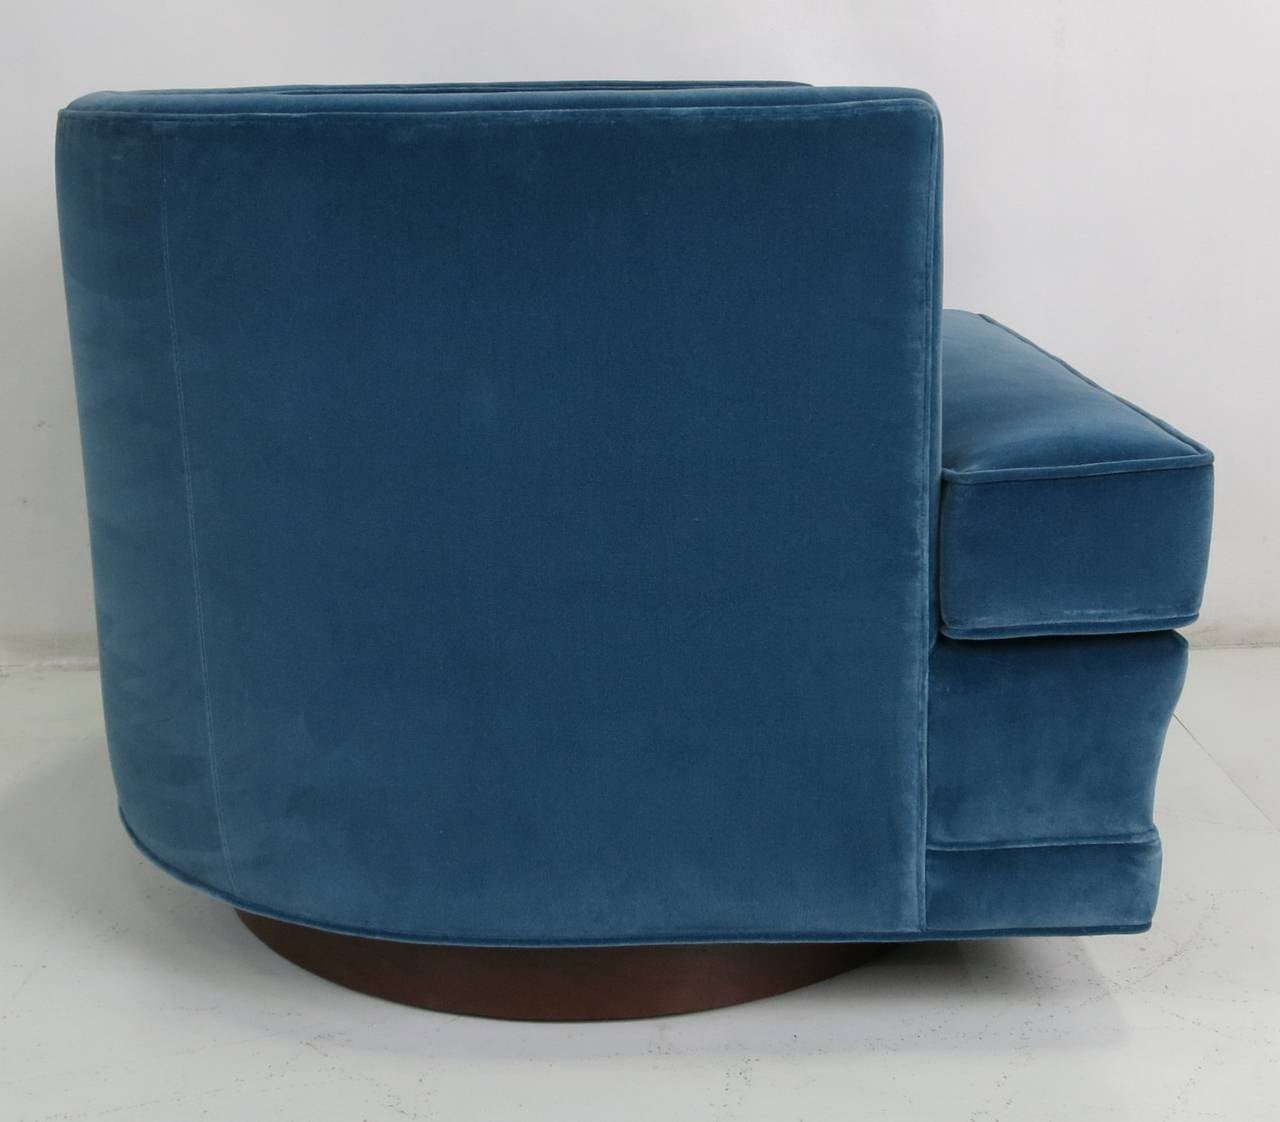 Fine pair of swivel lounge chairs freshly upholstered in luxurious teal velvet. The round walnut swivel base has been freshly refinished and the swivel plate has been replaced with a new heavy duty example.